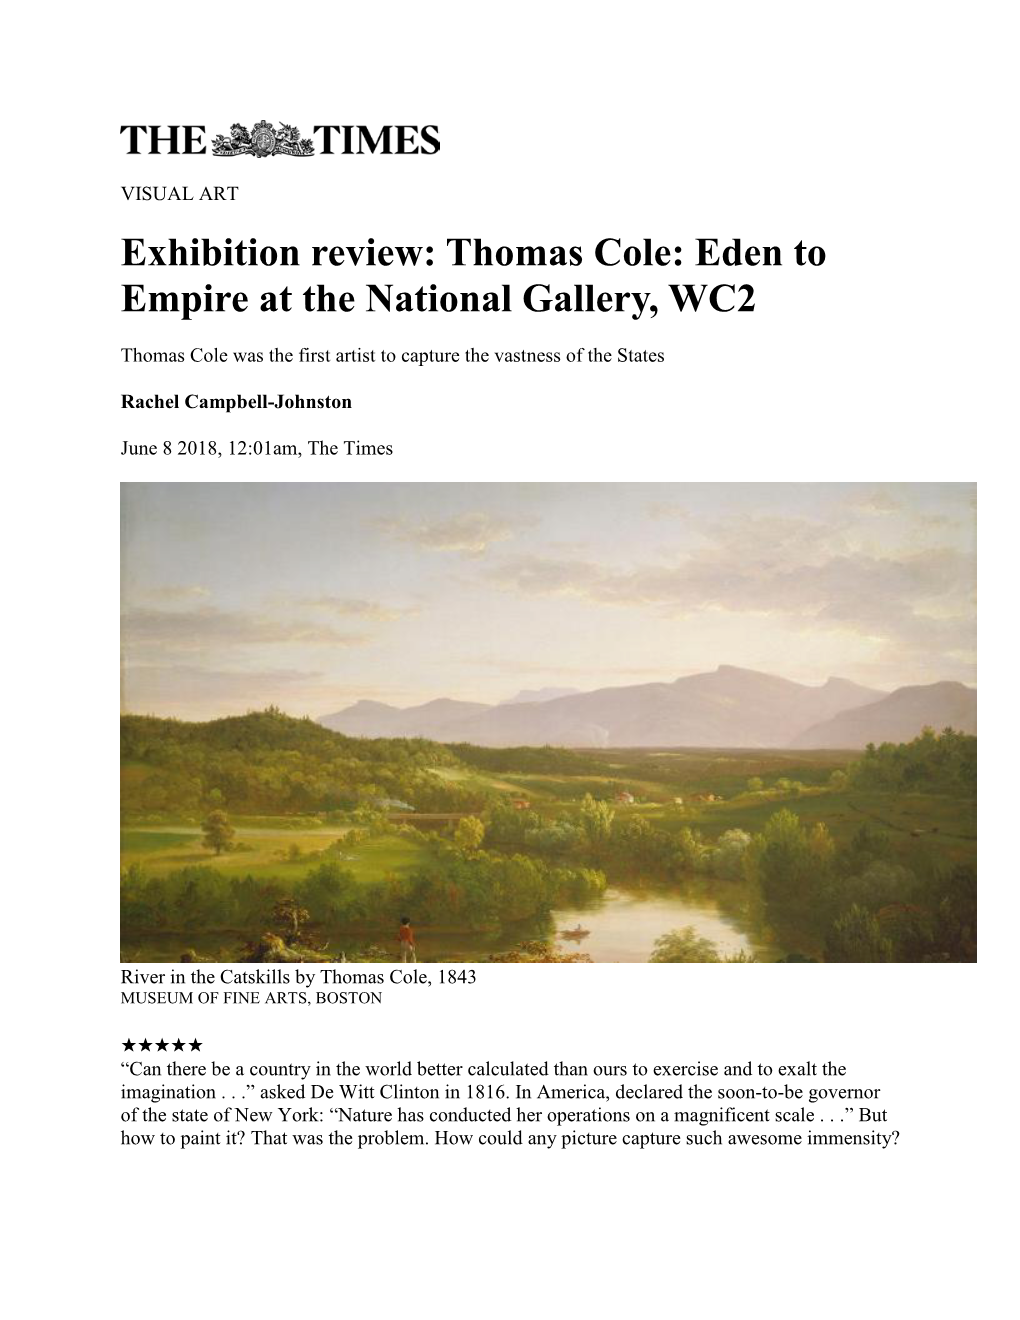 Thomas Cole: Eden to Empire at the National Gallery, WC2